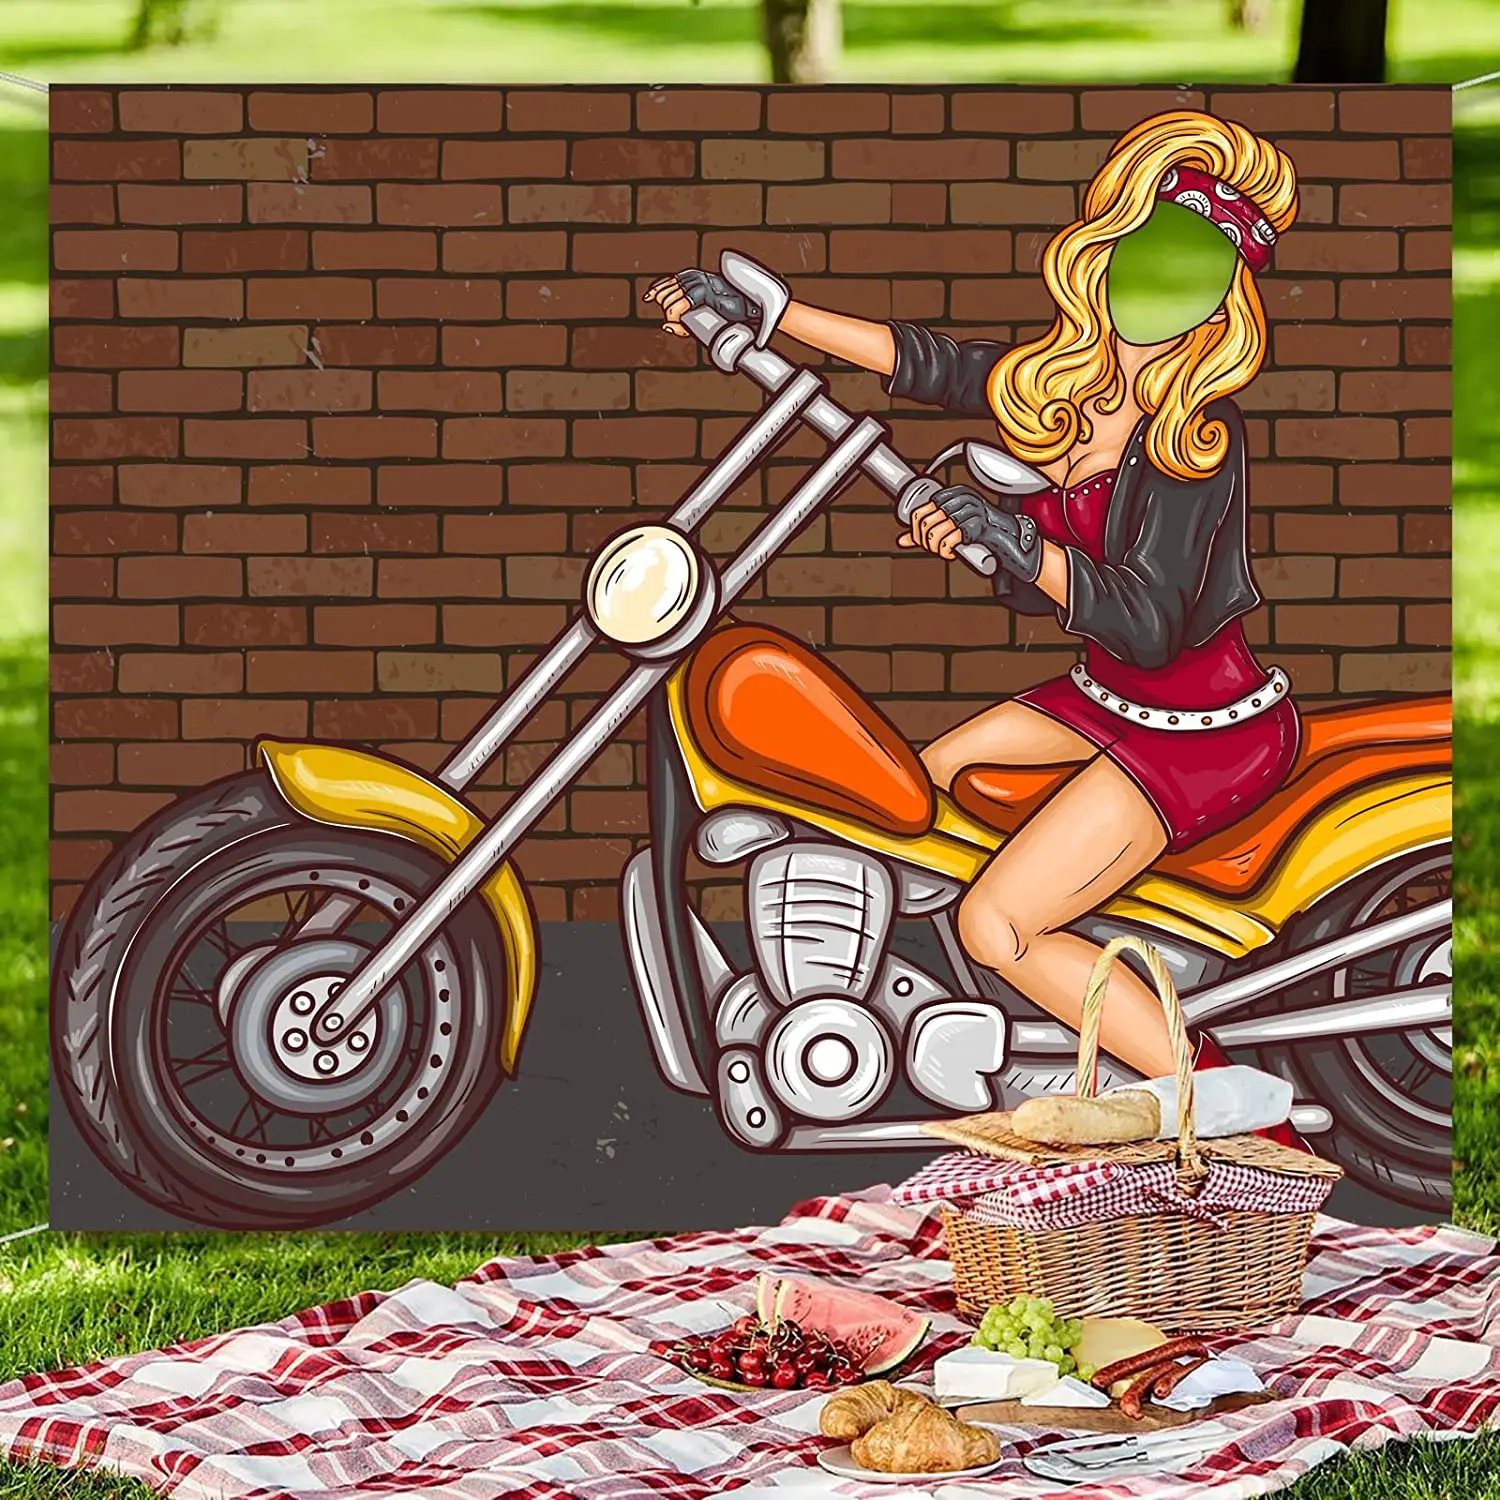 

Motorcycle Cool Lady Biker Face Banner Backdrop Background Sports Theme Pretend Play Party Game Decor For Rider Racing